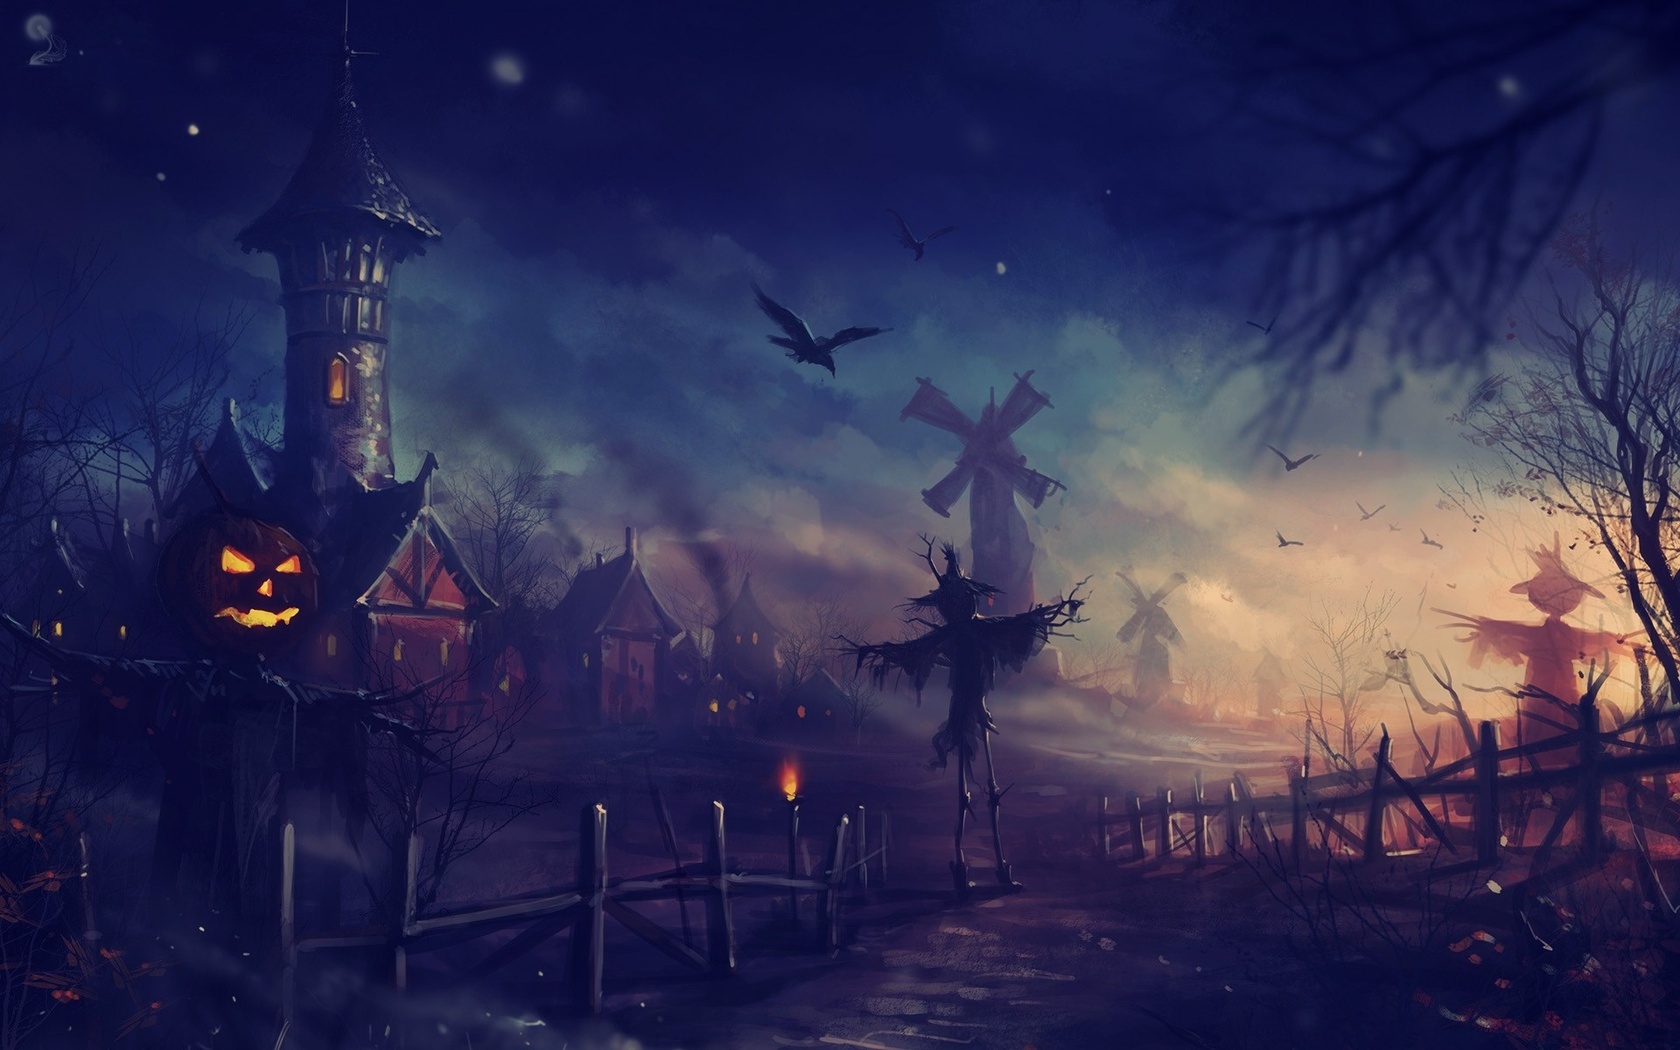 Hallows HD Wallpaper Search More High Definition 1080p 720p